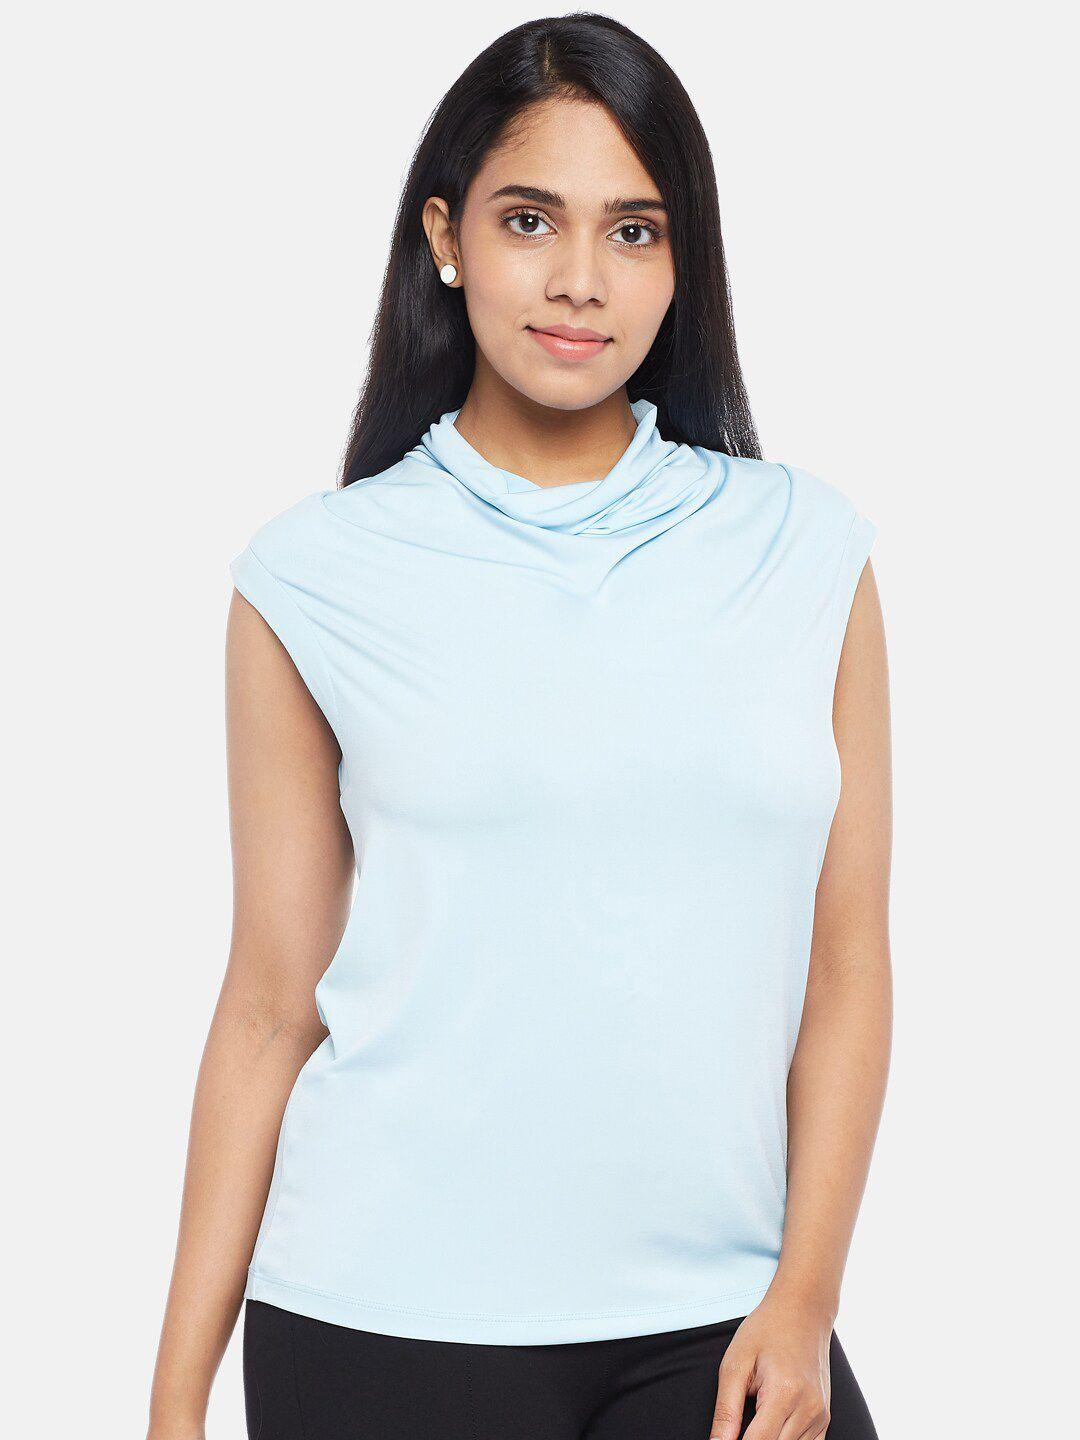 annabelle-by-pantaloons-women-turquoise-blue-solid-cowl-neck-sleeveless-regular-top